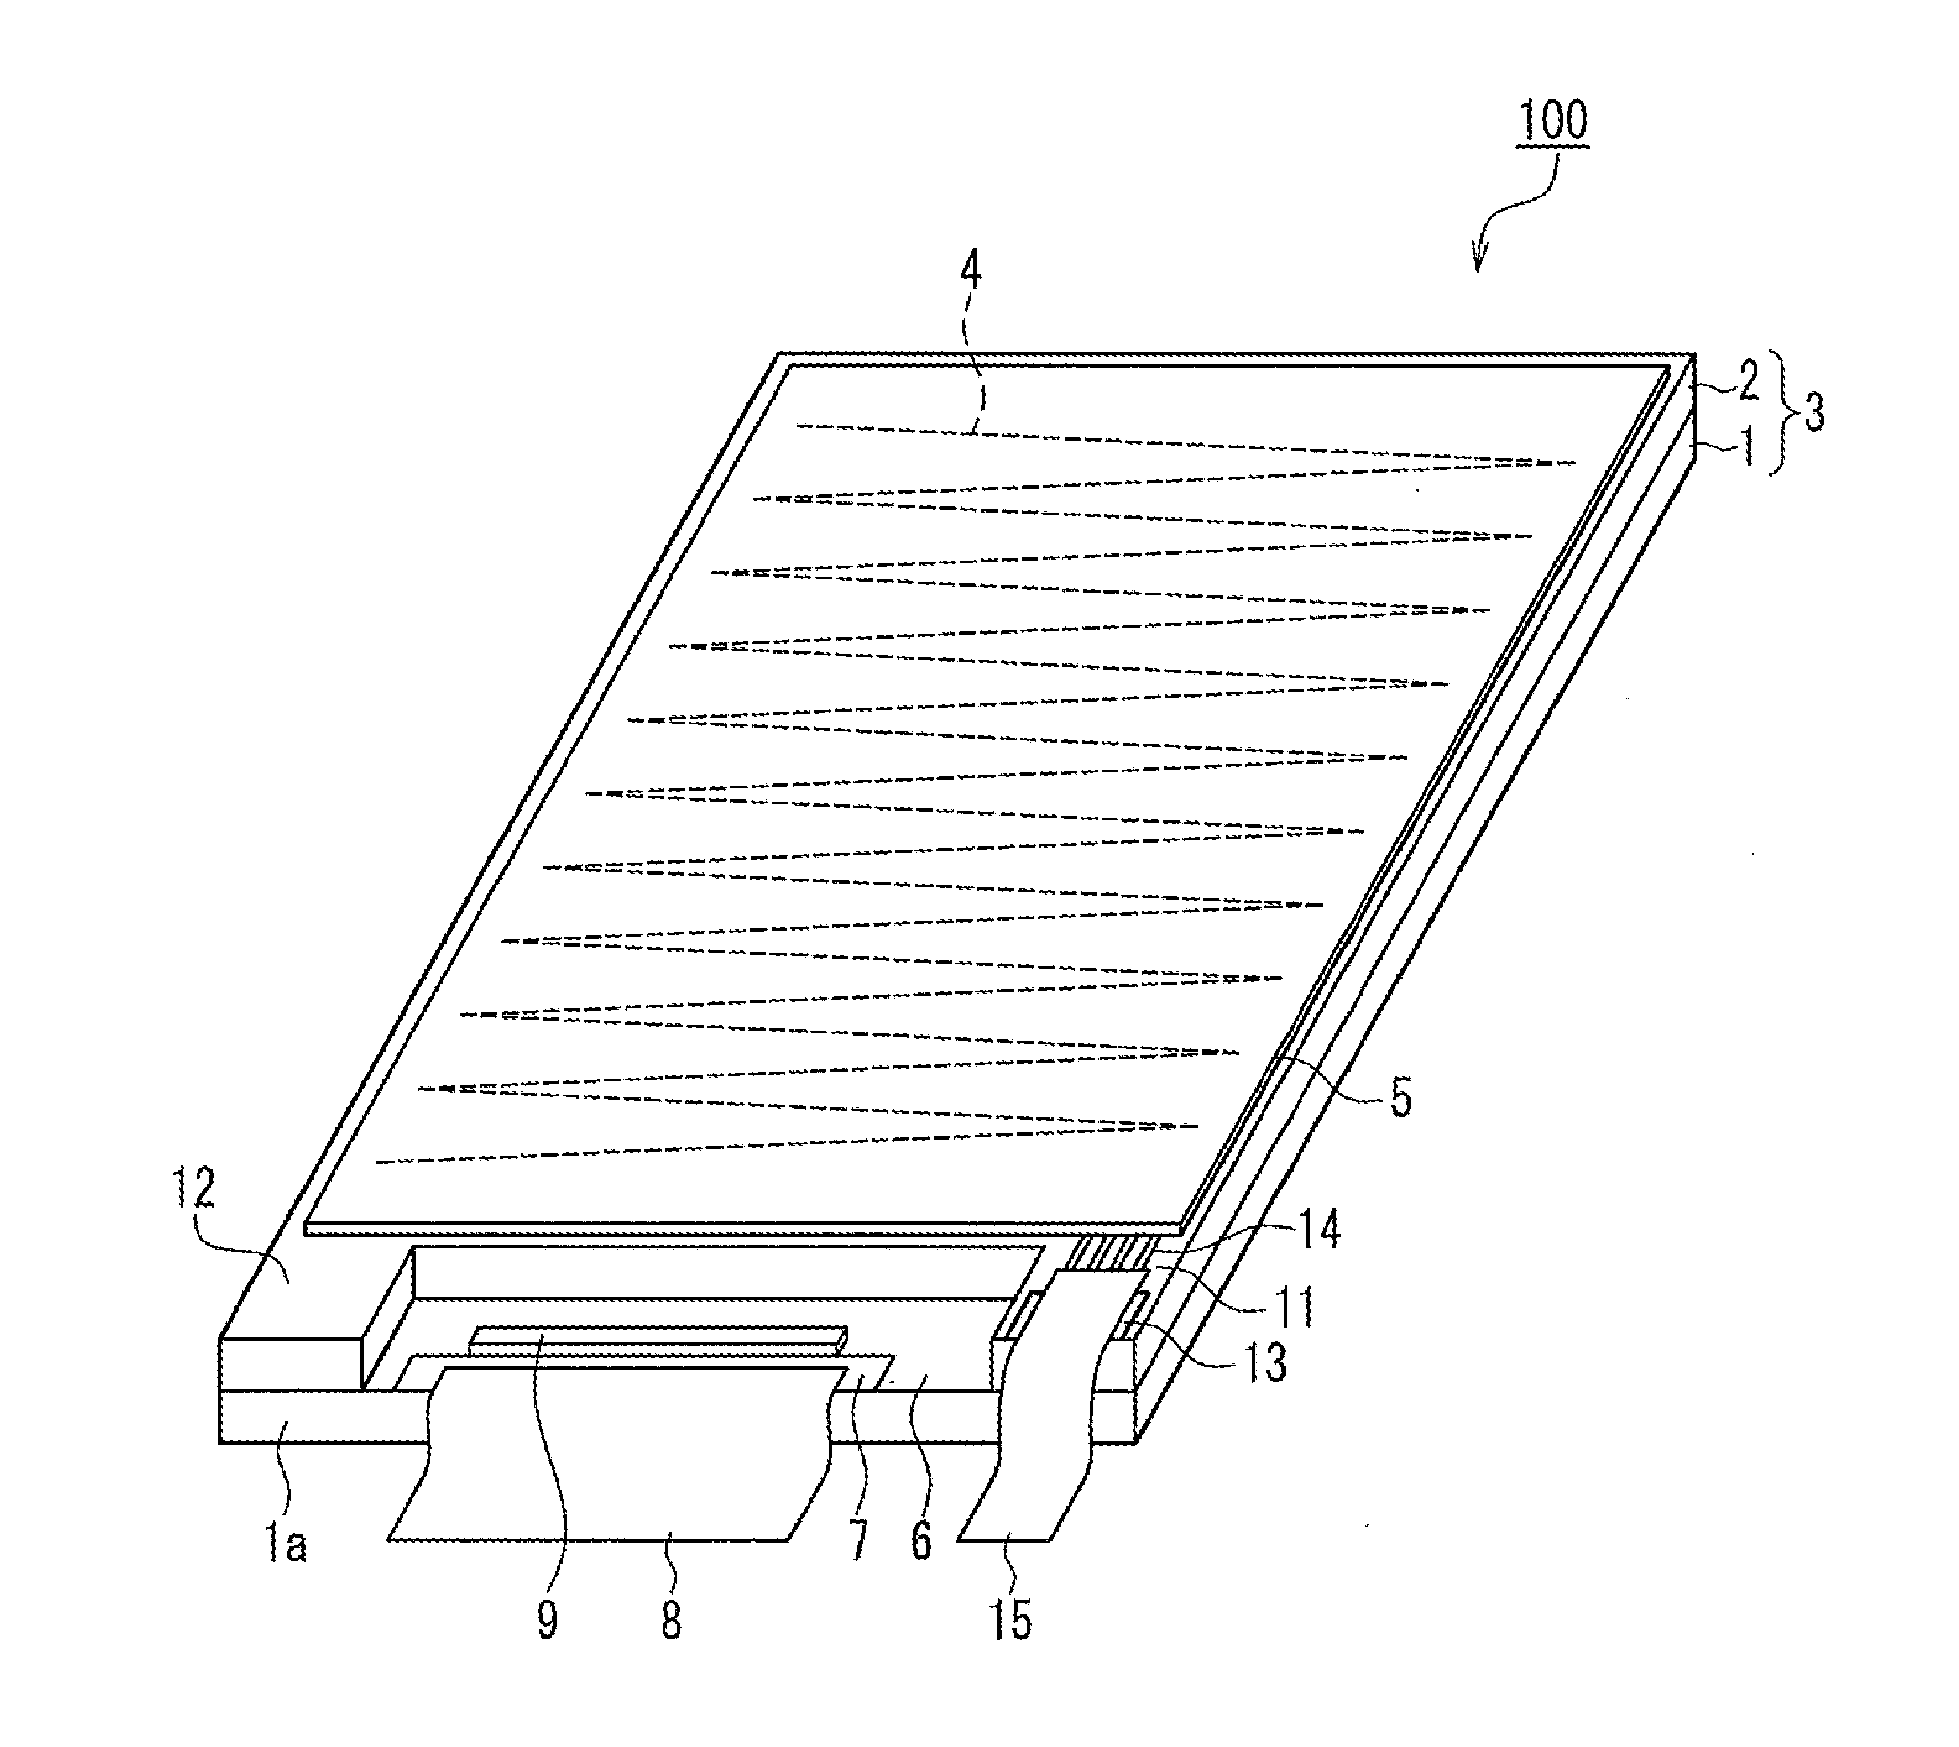 Display device with attached touch panel